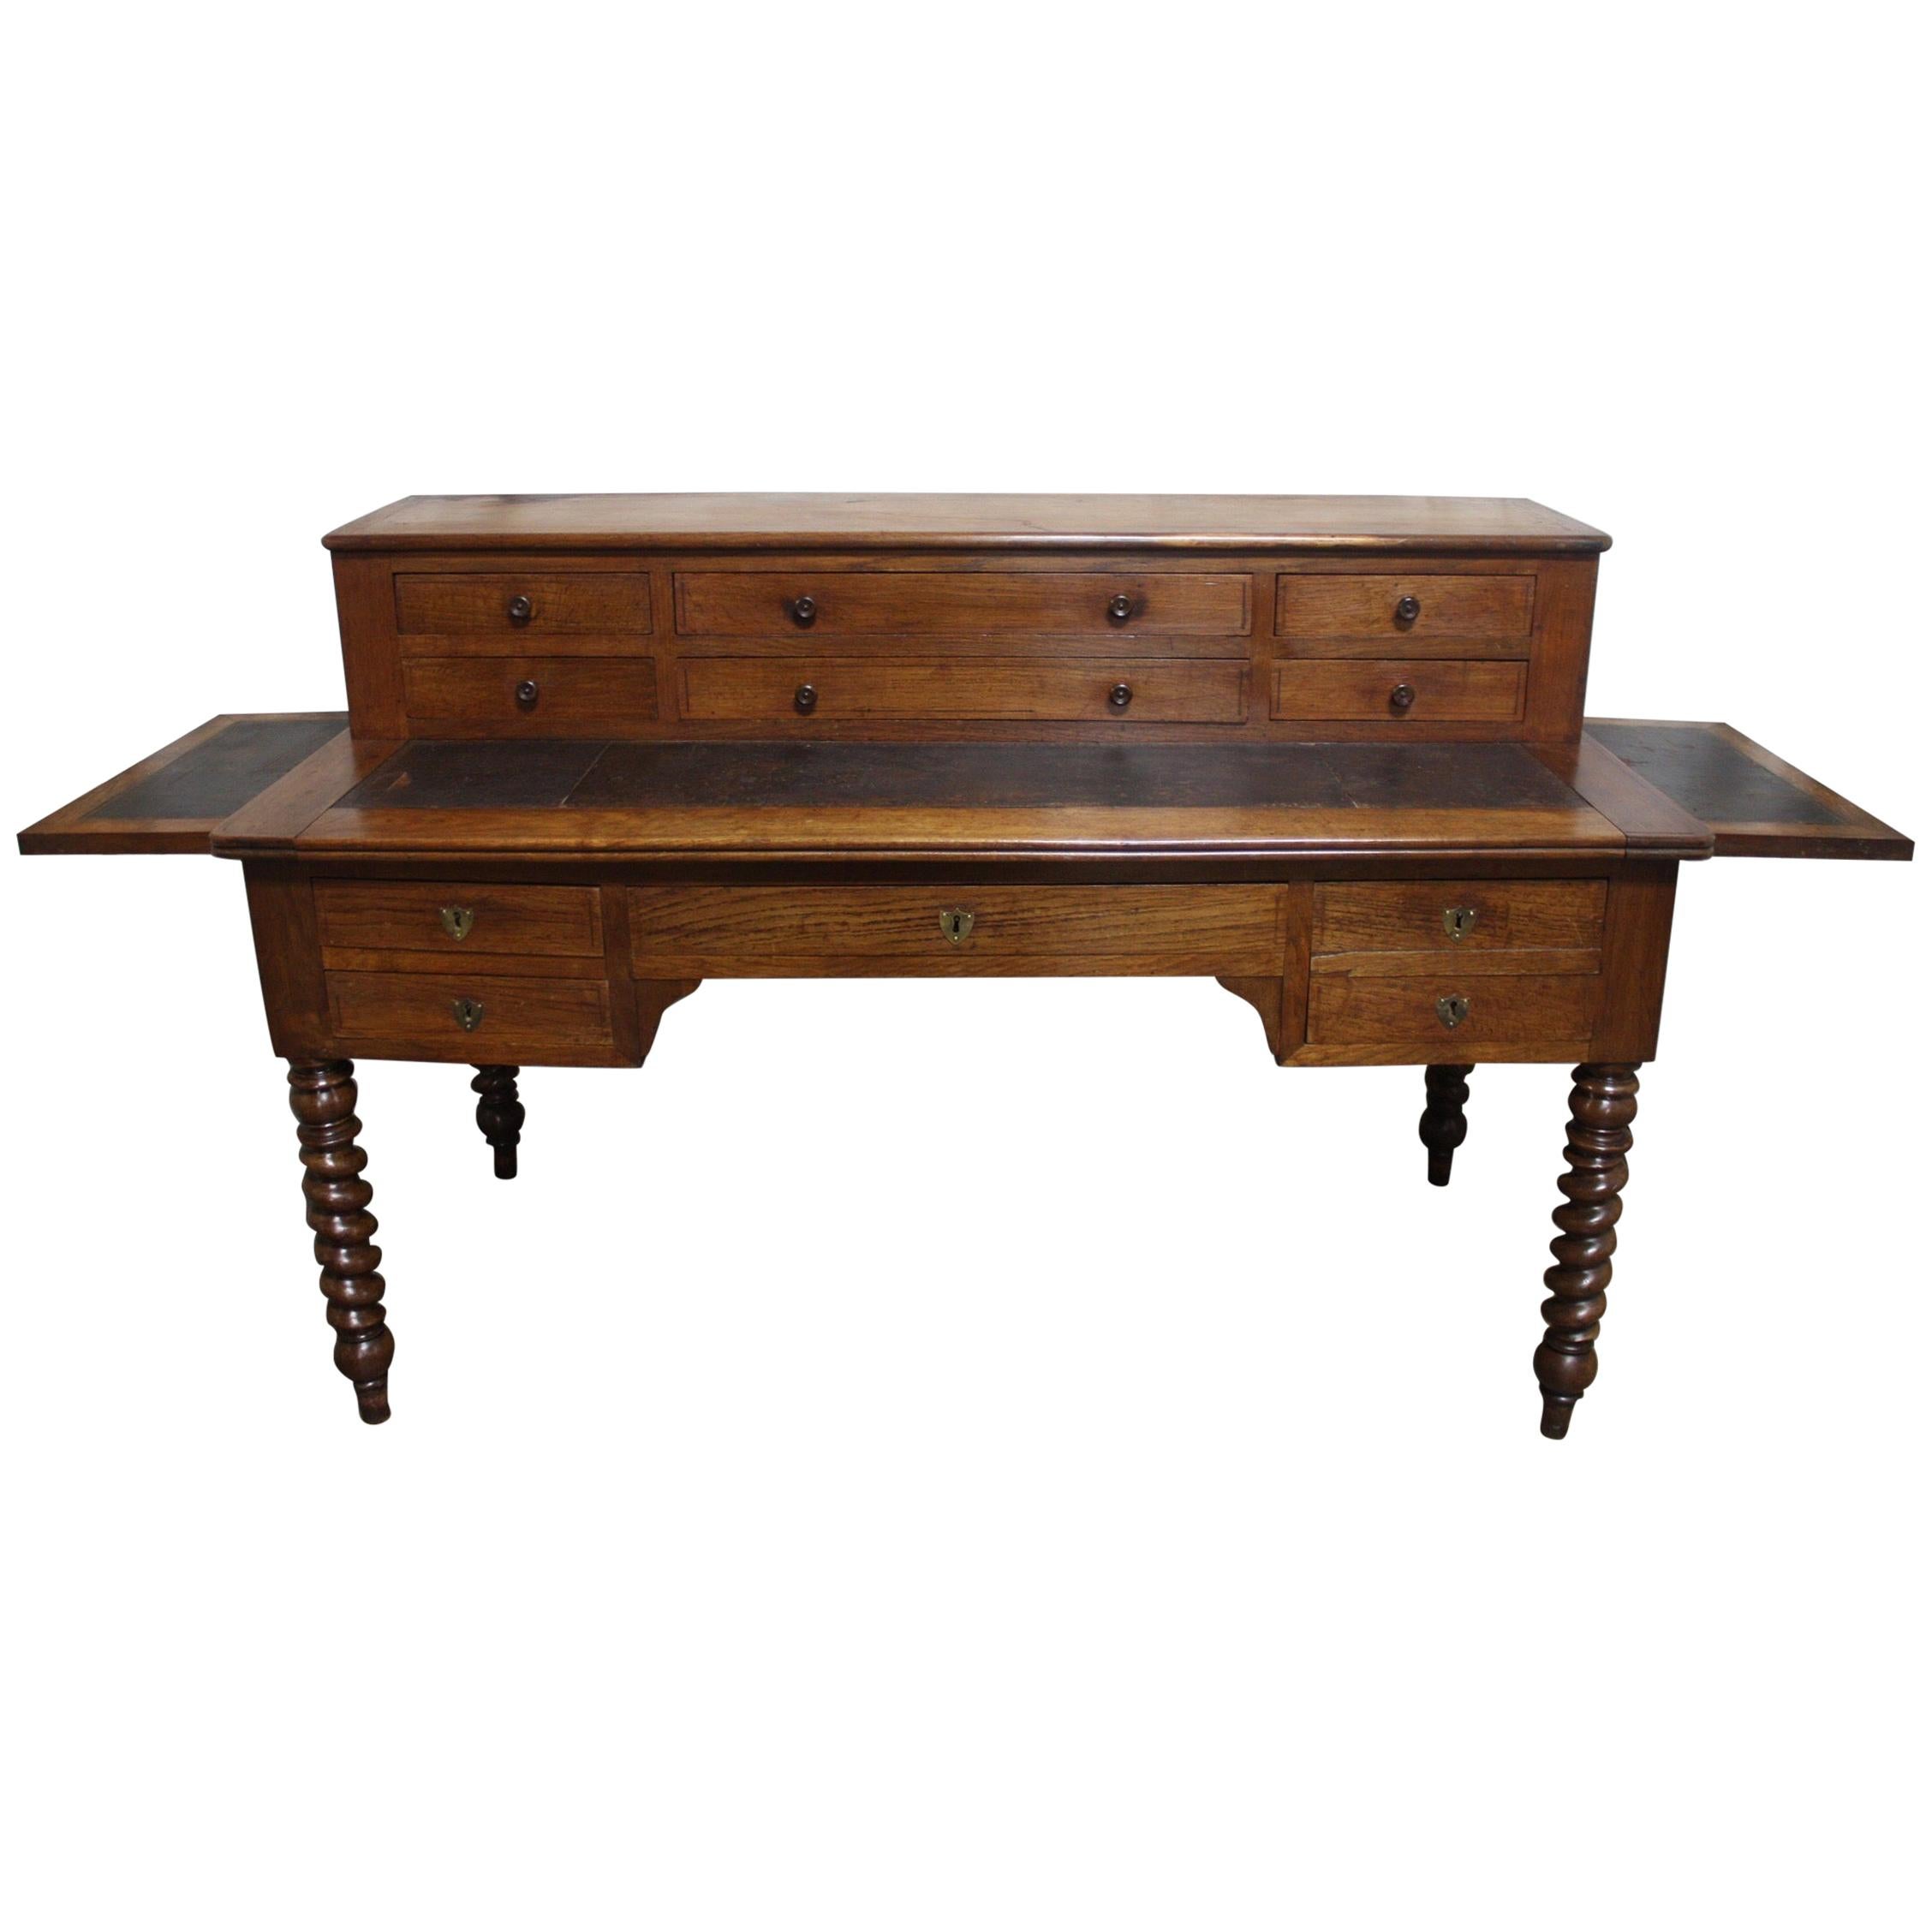 French Louis-Philippe Period Desk